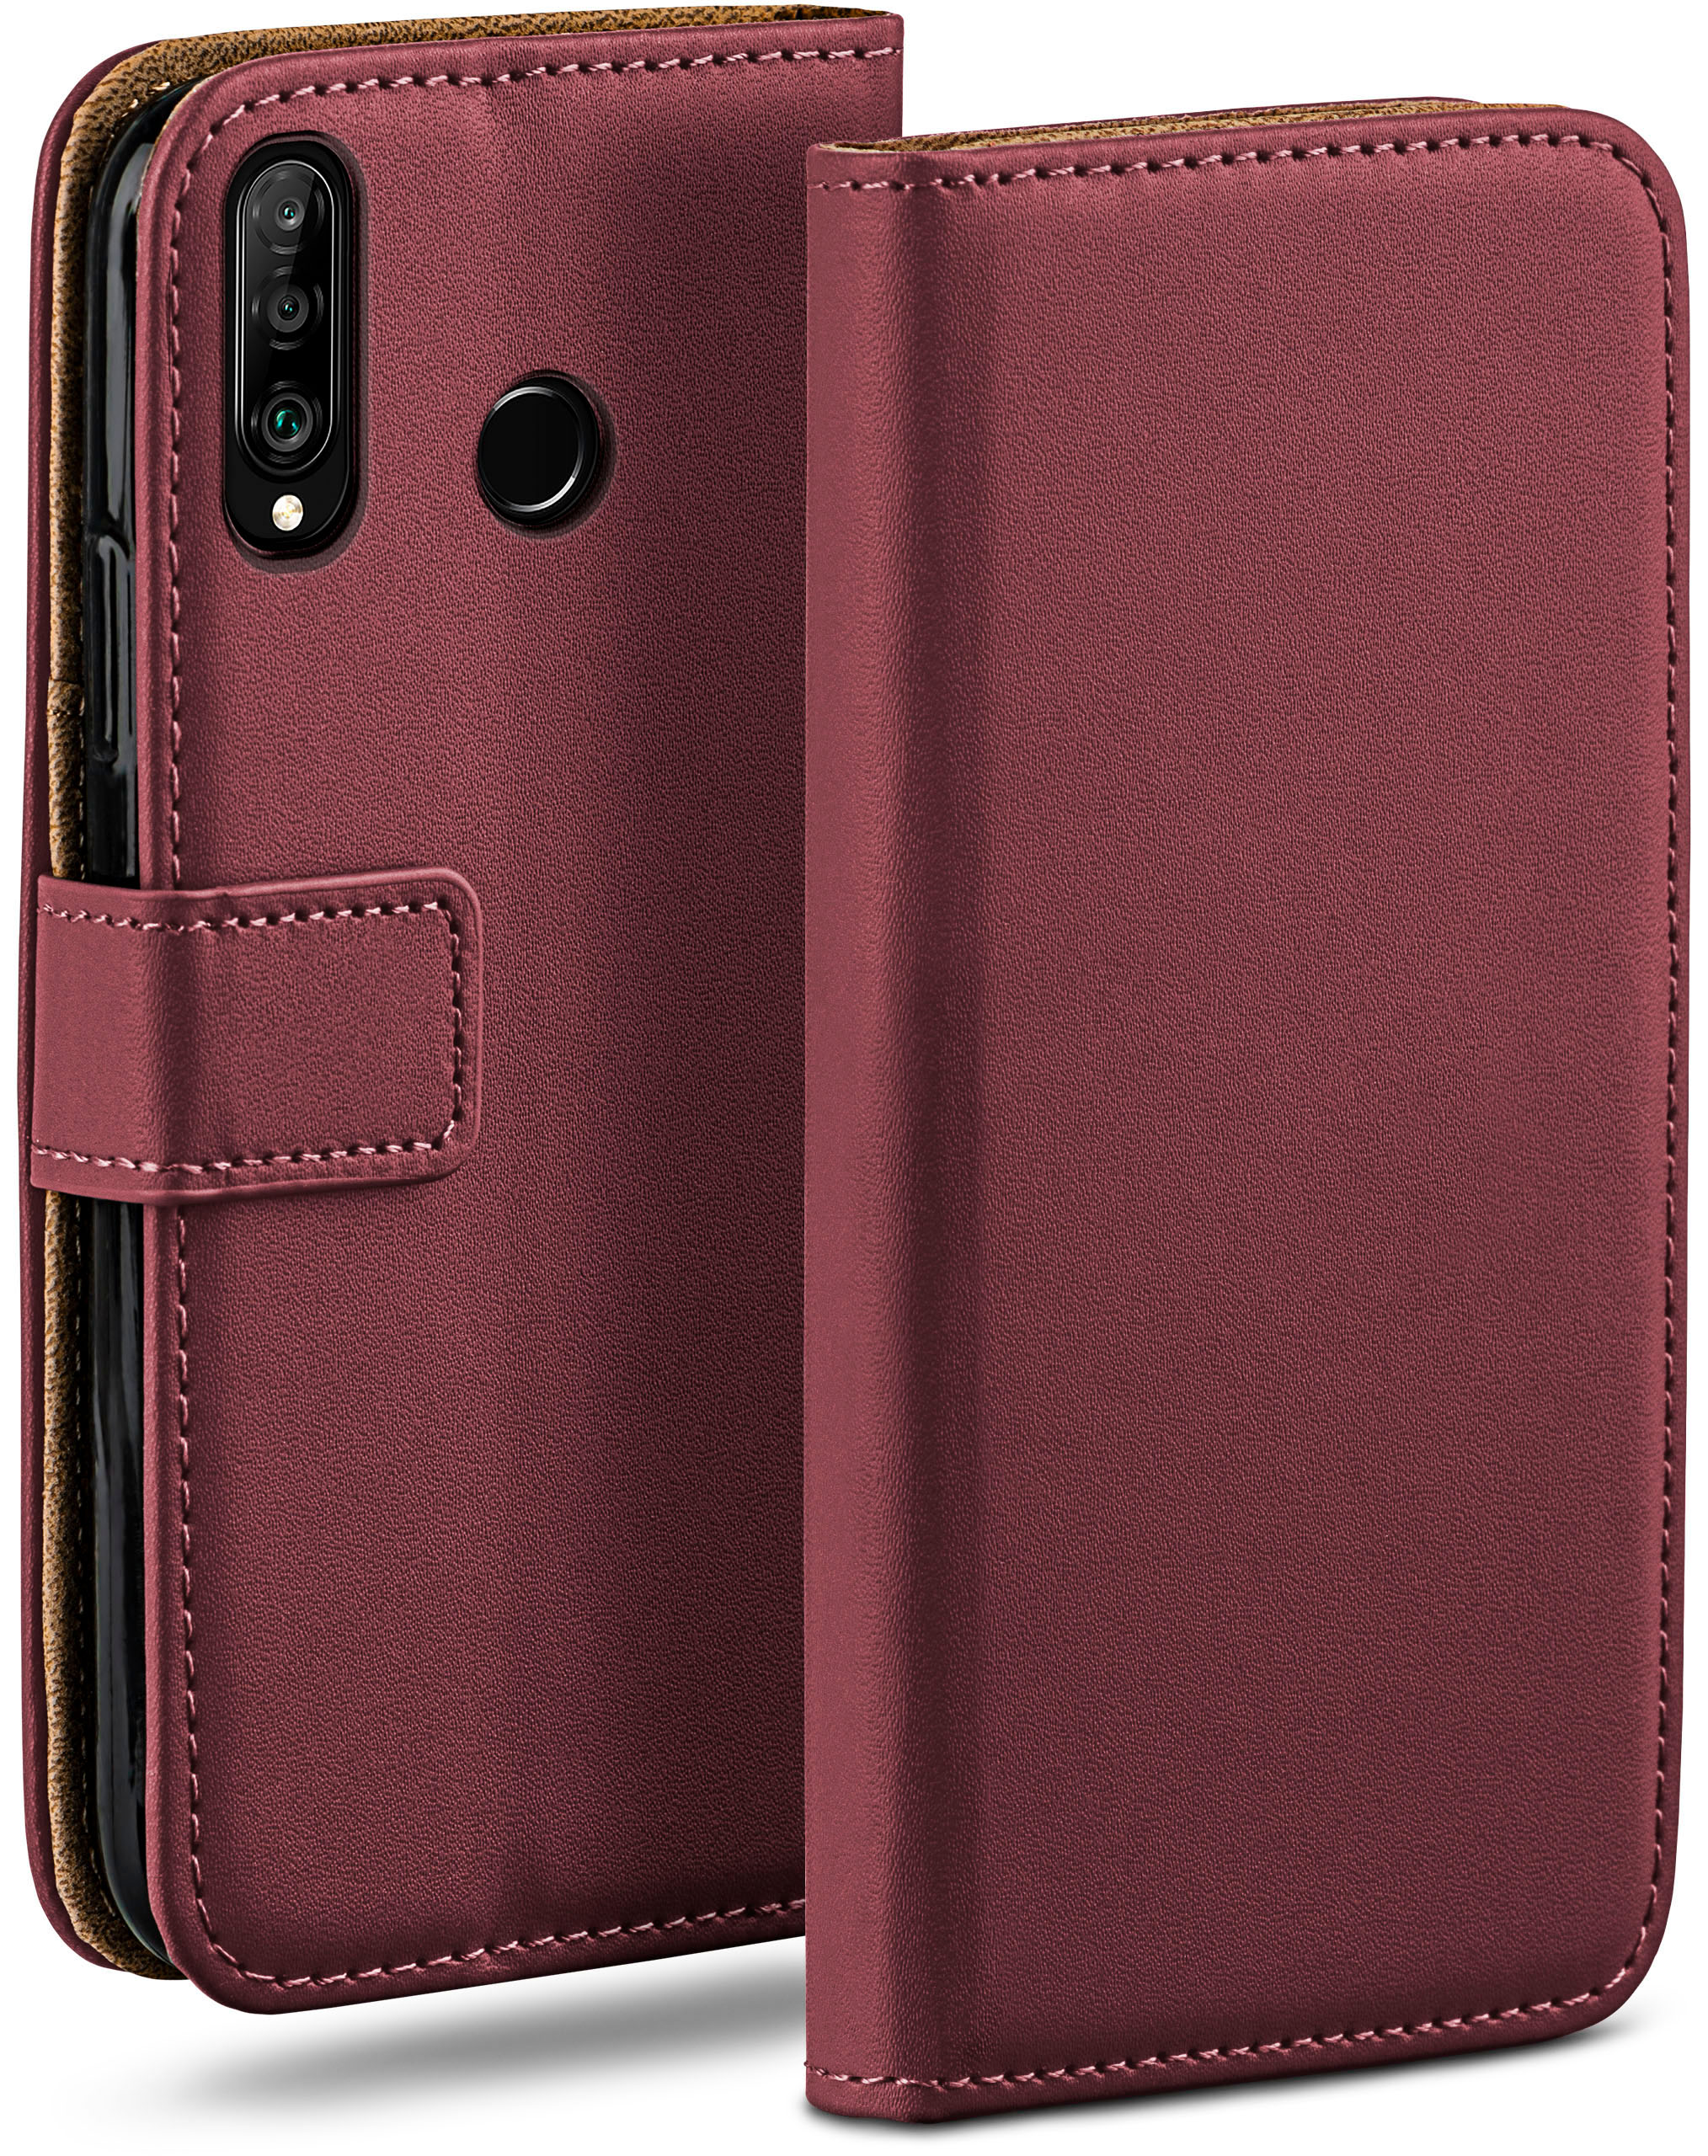 Lite/P30 P30 MOEX Maroon-Red Case, New, Book Huawei, Bookcover, Lite